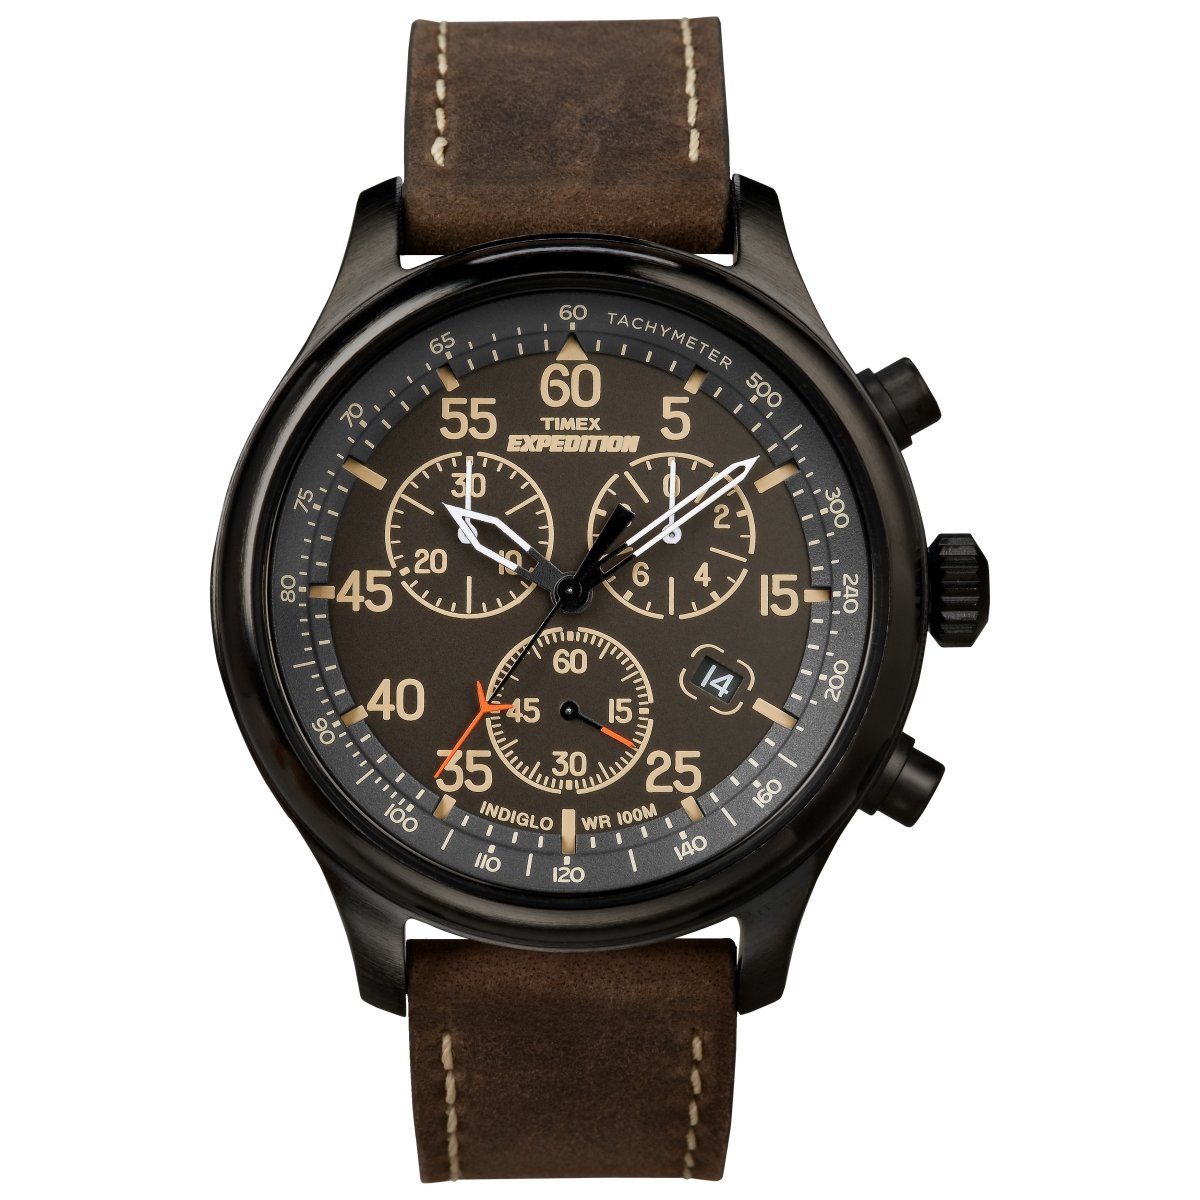 T499059j Mens T49905 Expedition Field Chronograph Black & Brown Leather Strap Watch